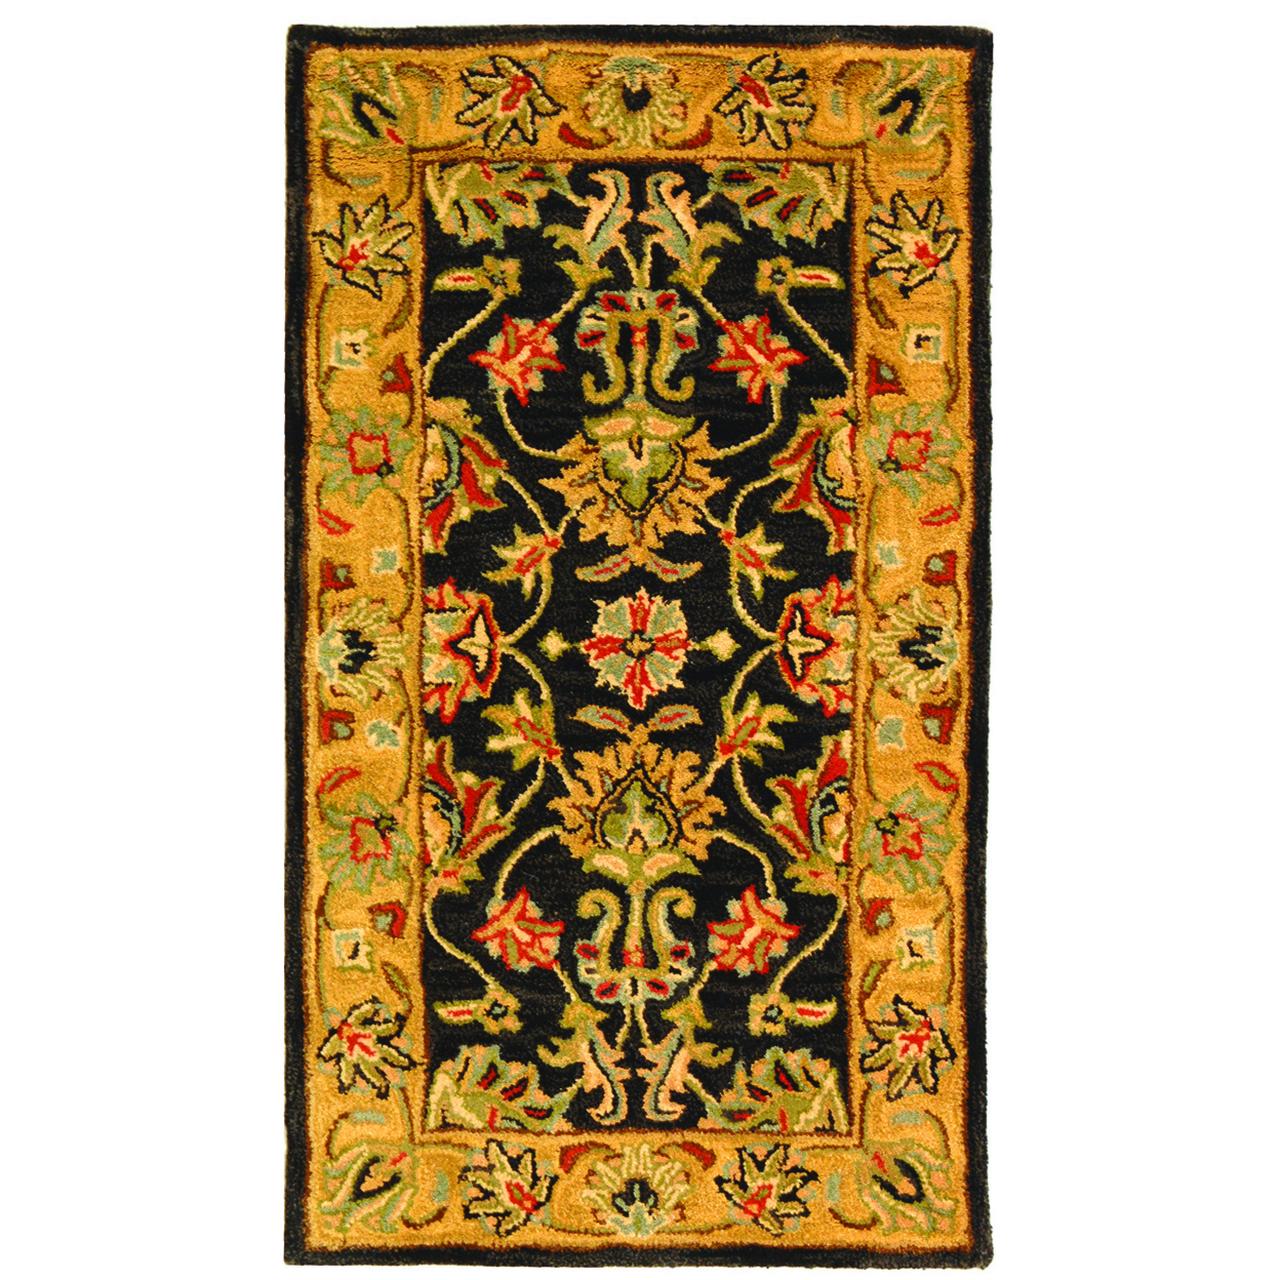 SAFAVIEH Heritage Regis Traditional Wool Area Rug, Charcoal/Gold, 2'3" x 4' - image 1 of 10